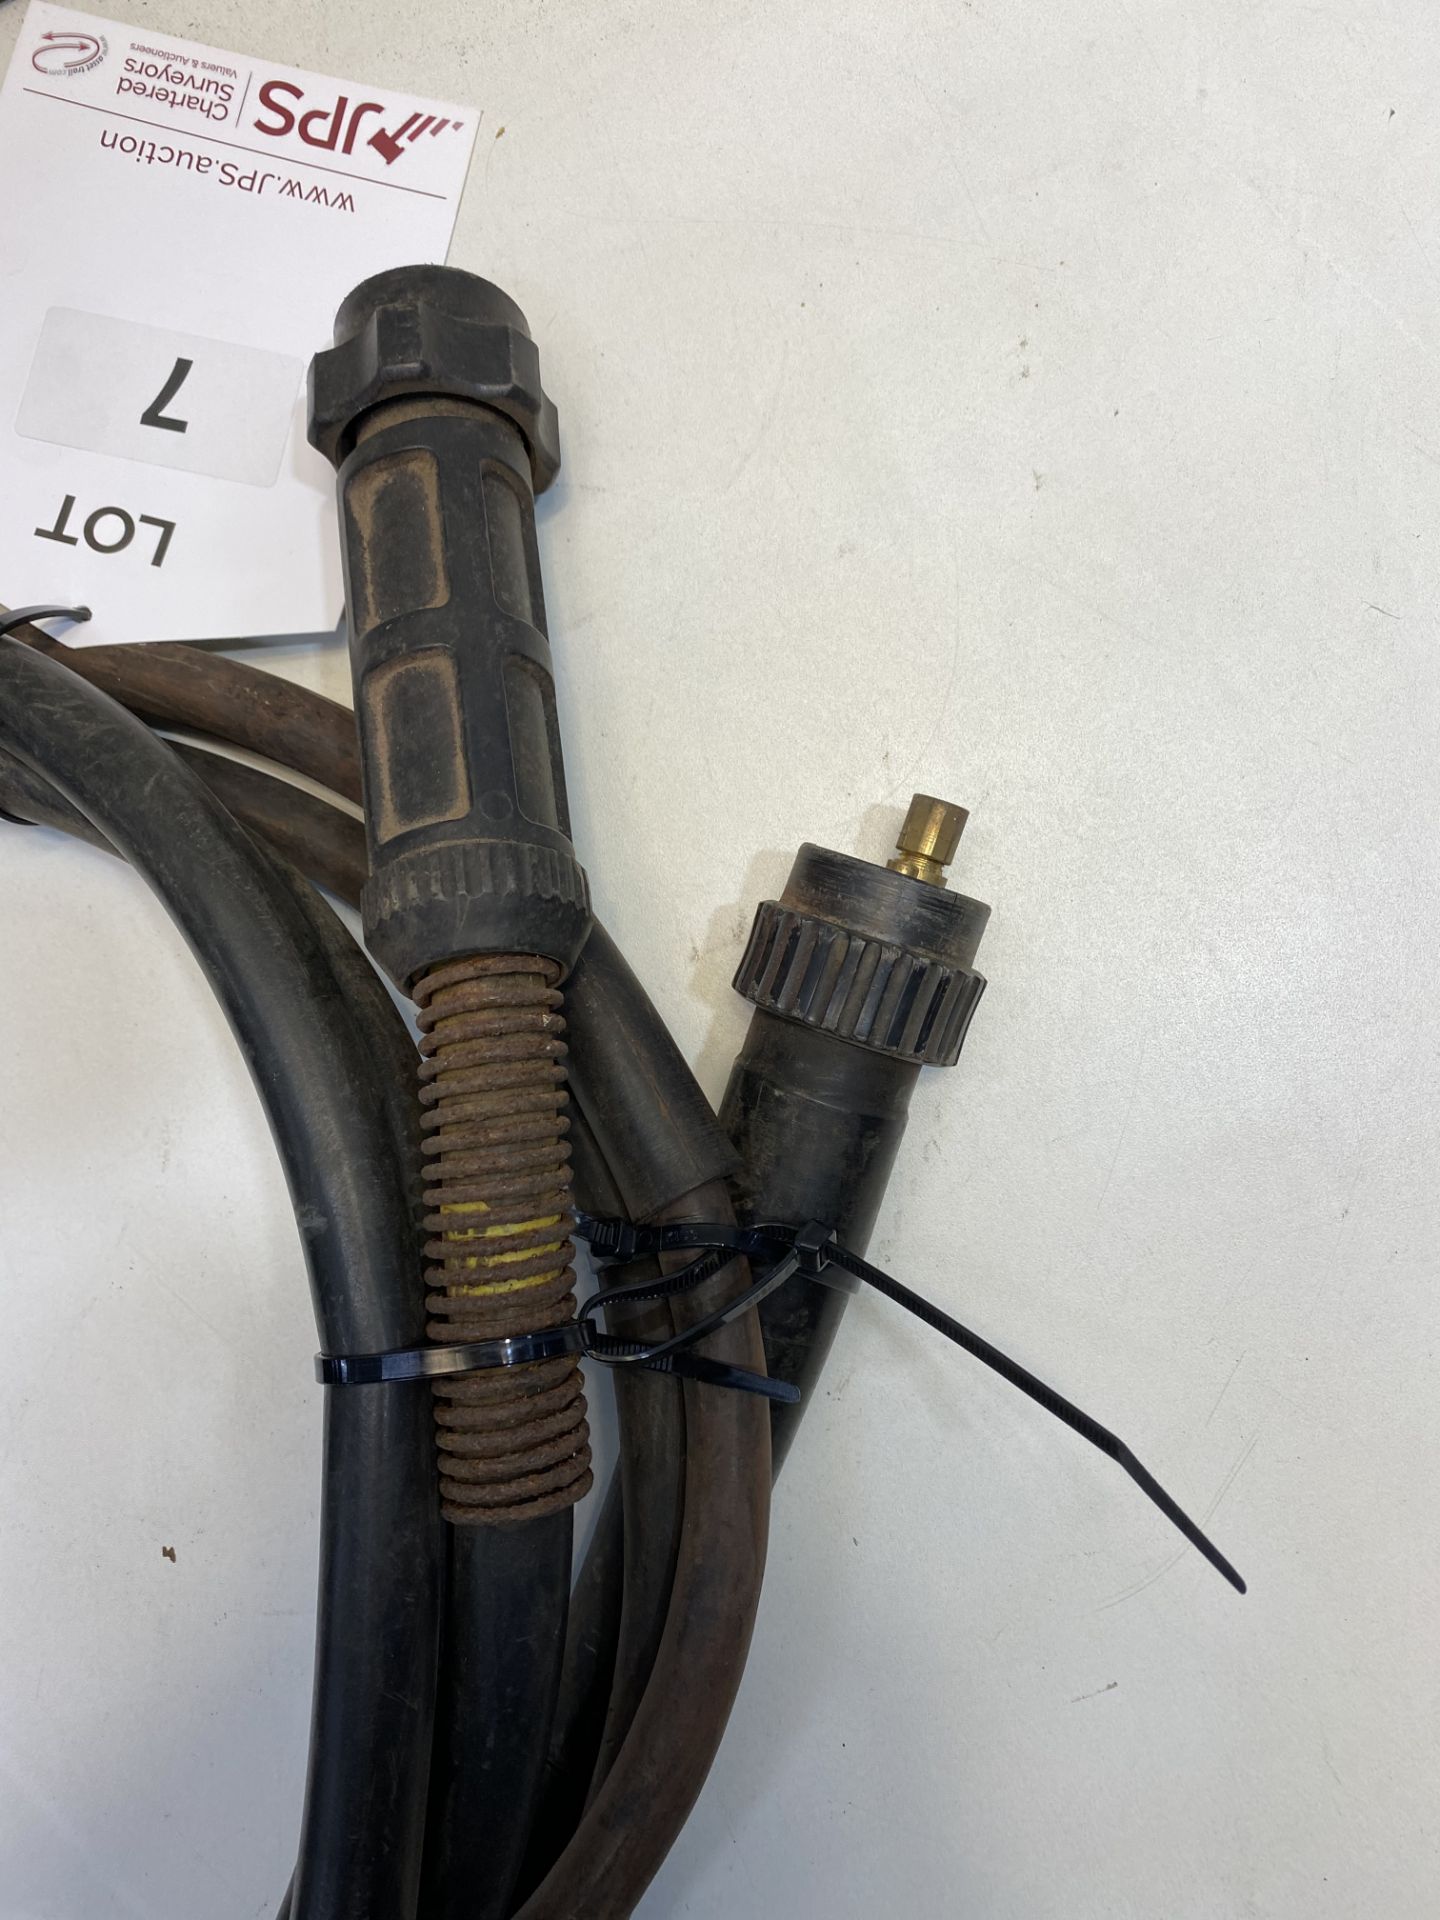 Pair of Unbranded Welding Guns/Torches - Image 3 of 3